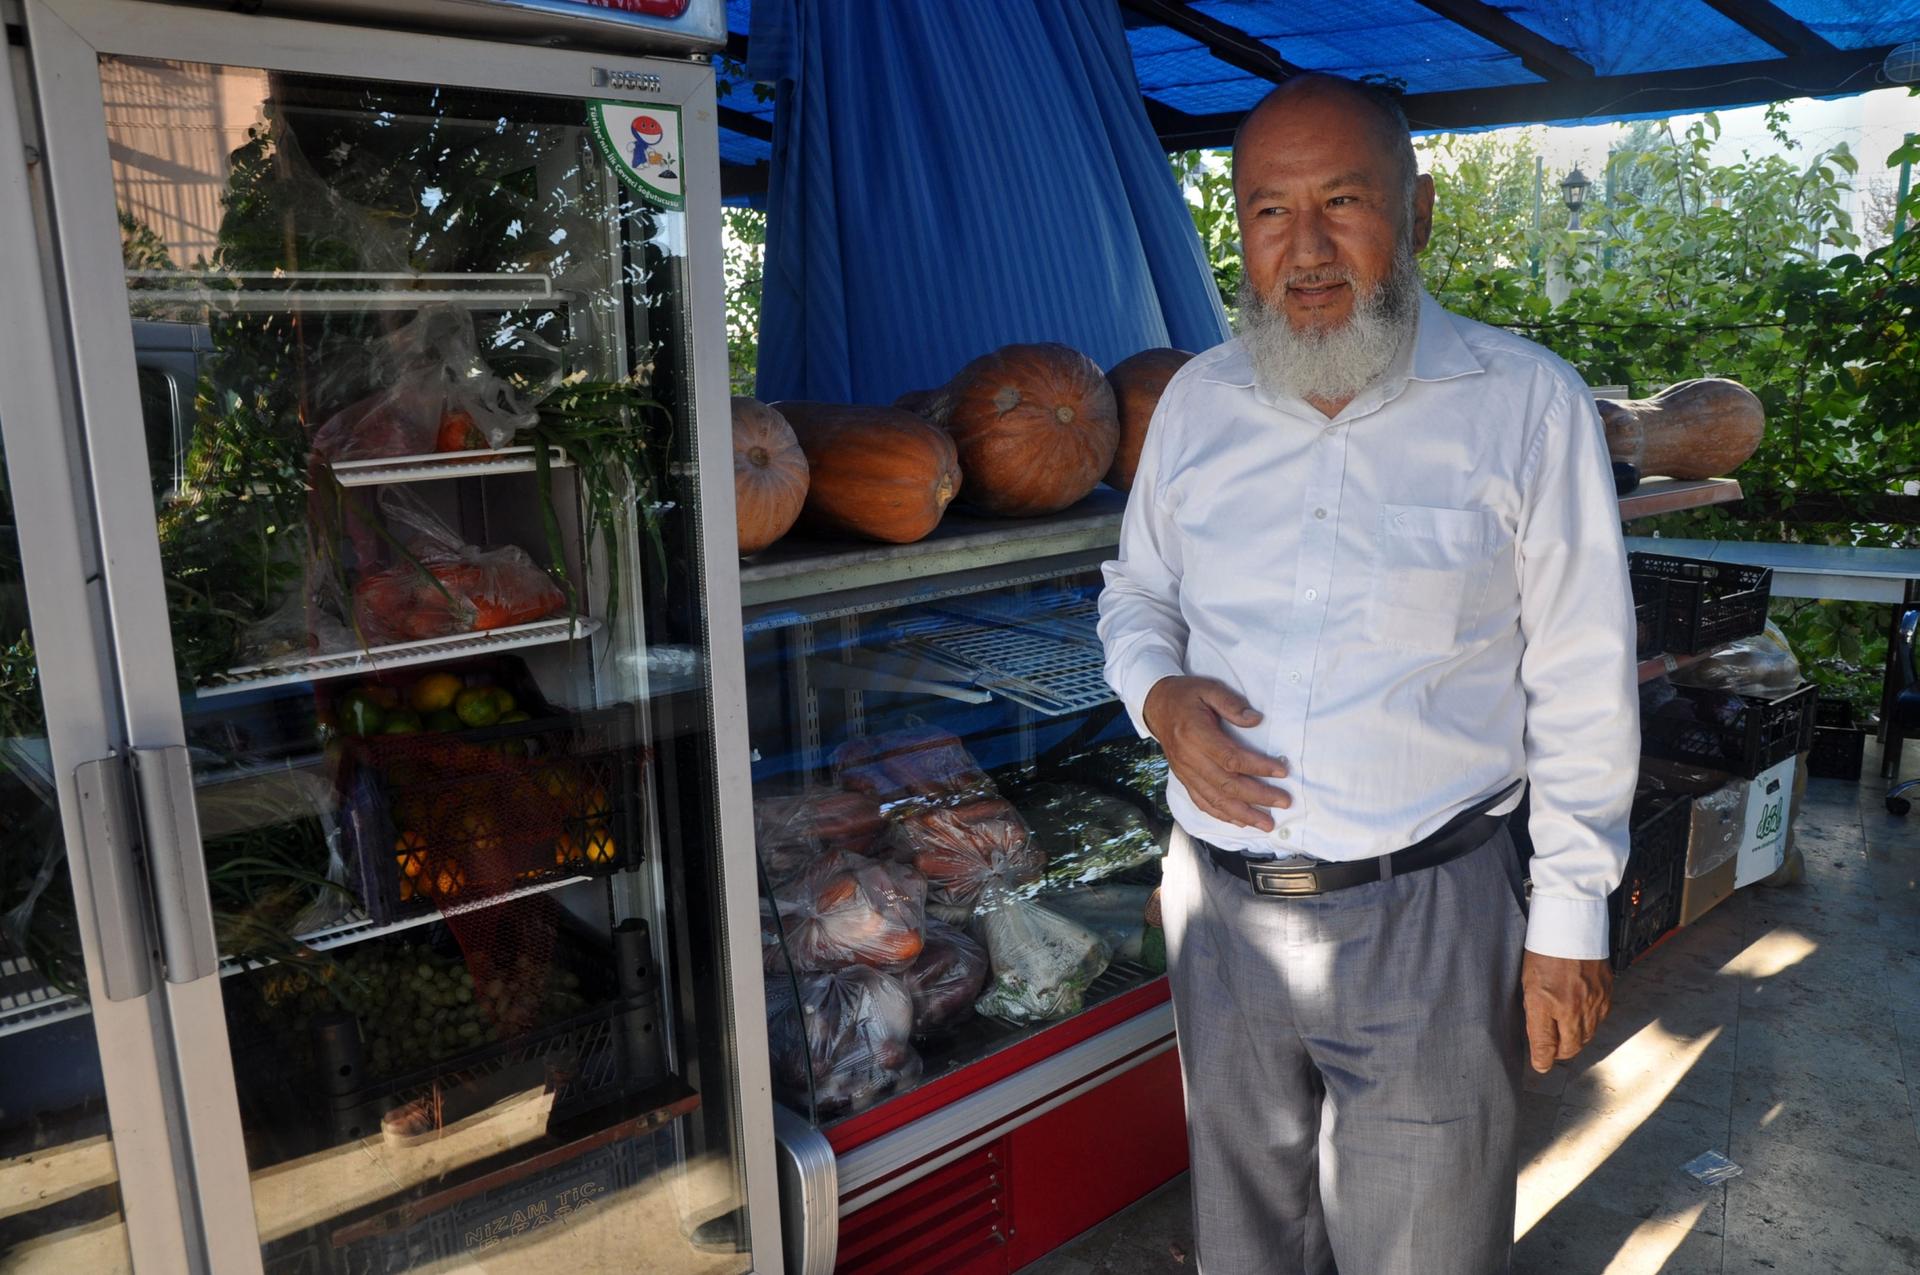 Imran Yakob is raising four of his grandchildren in Istanbul, supporting them with the proceeds of a small roadside shop.